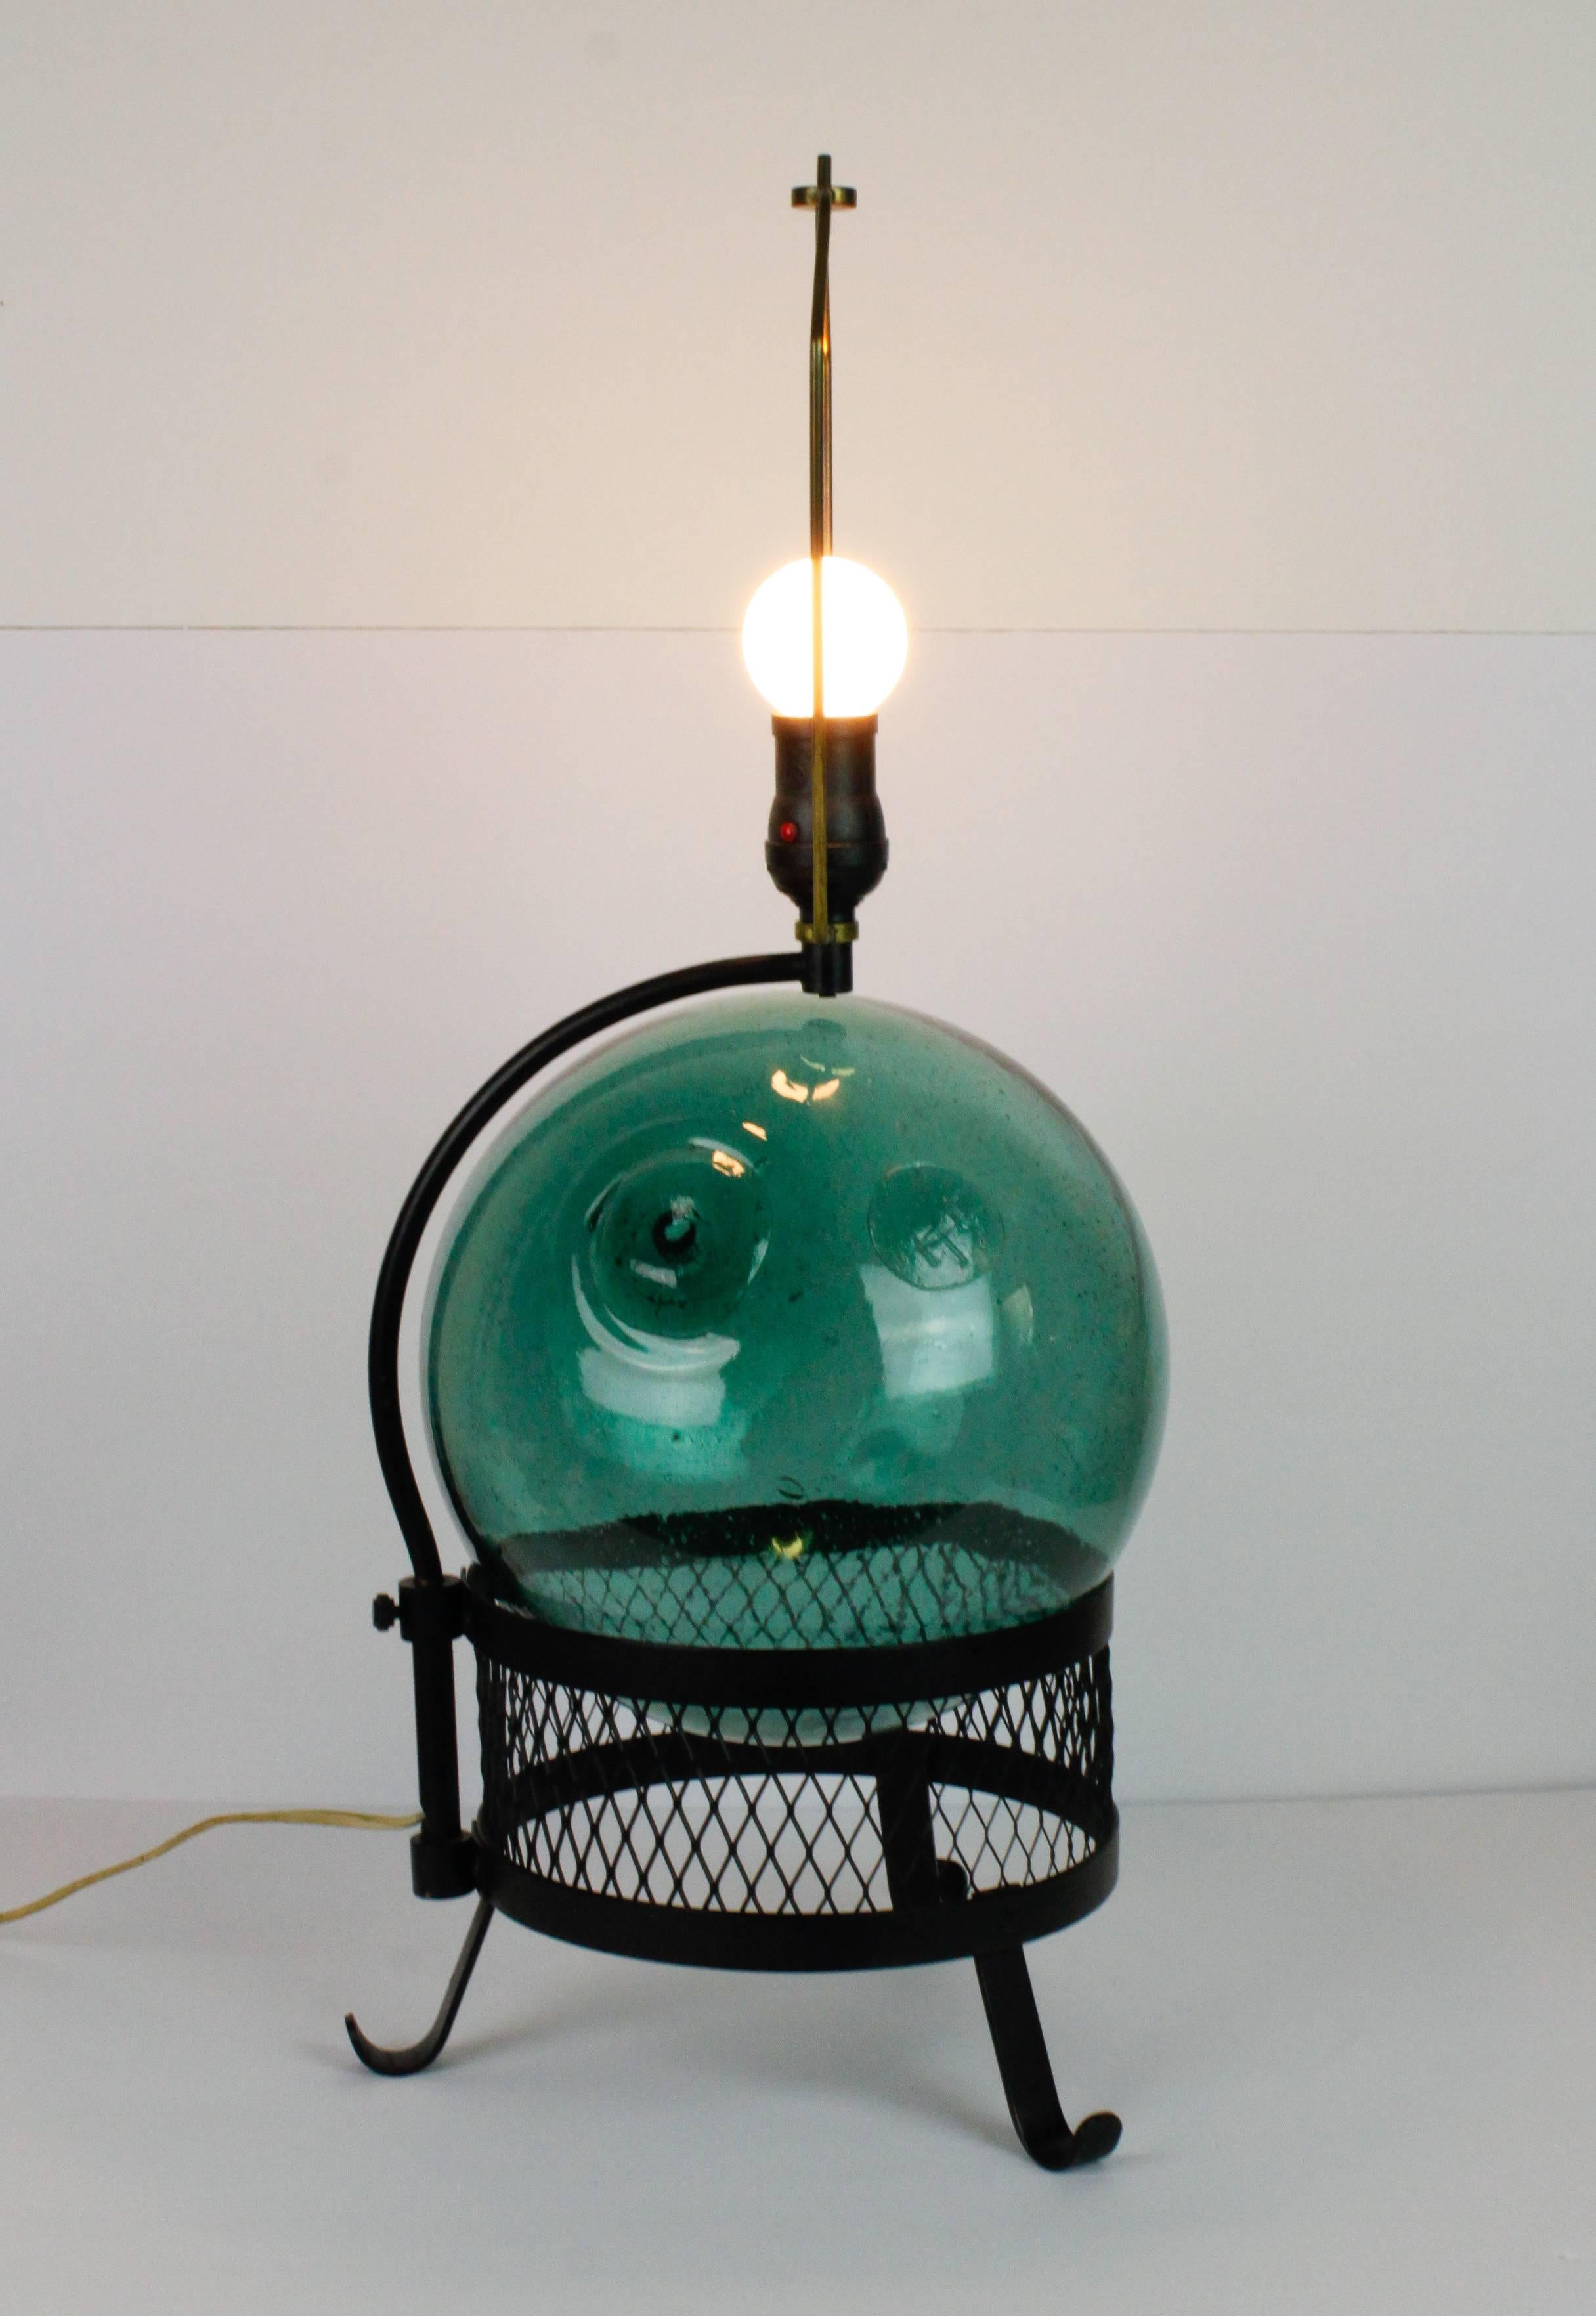 Midcentury Japanese fishing float lamp with black metal mesh base. In excellent vintage condition. Float is marked with 